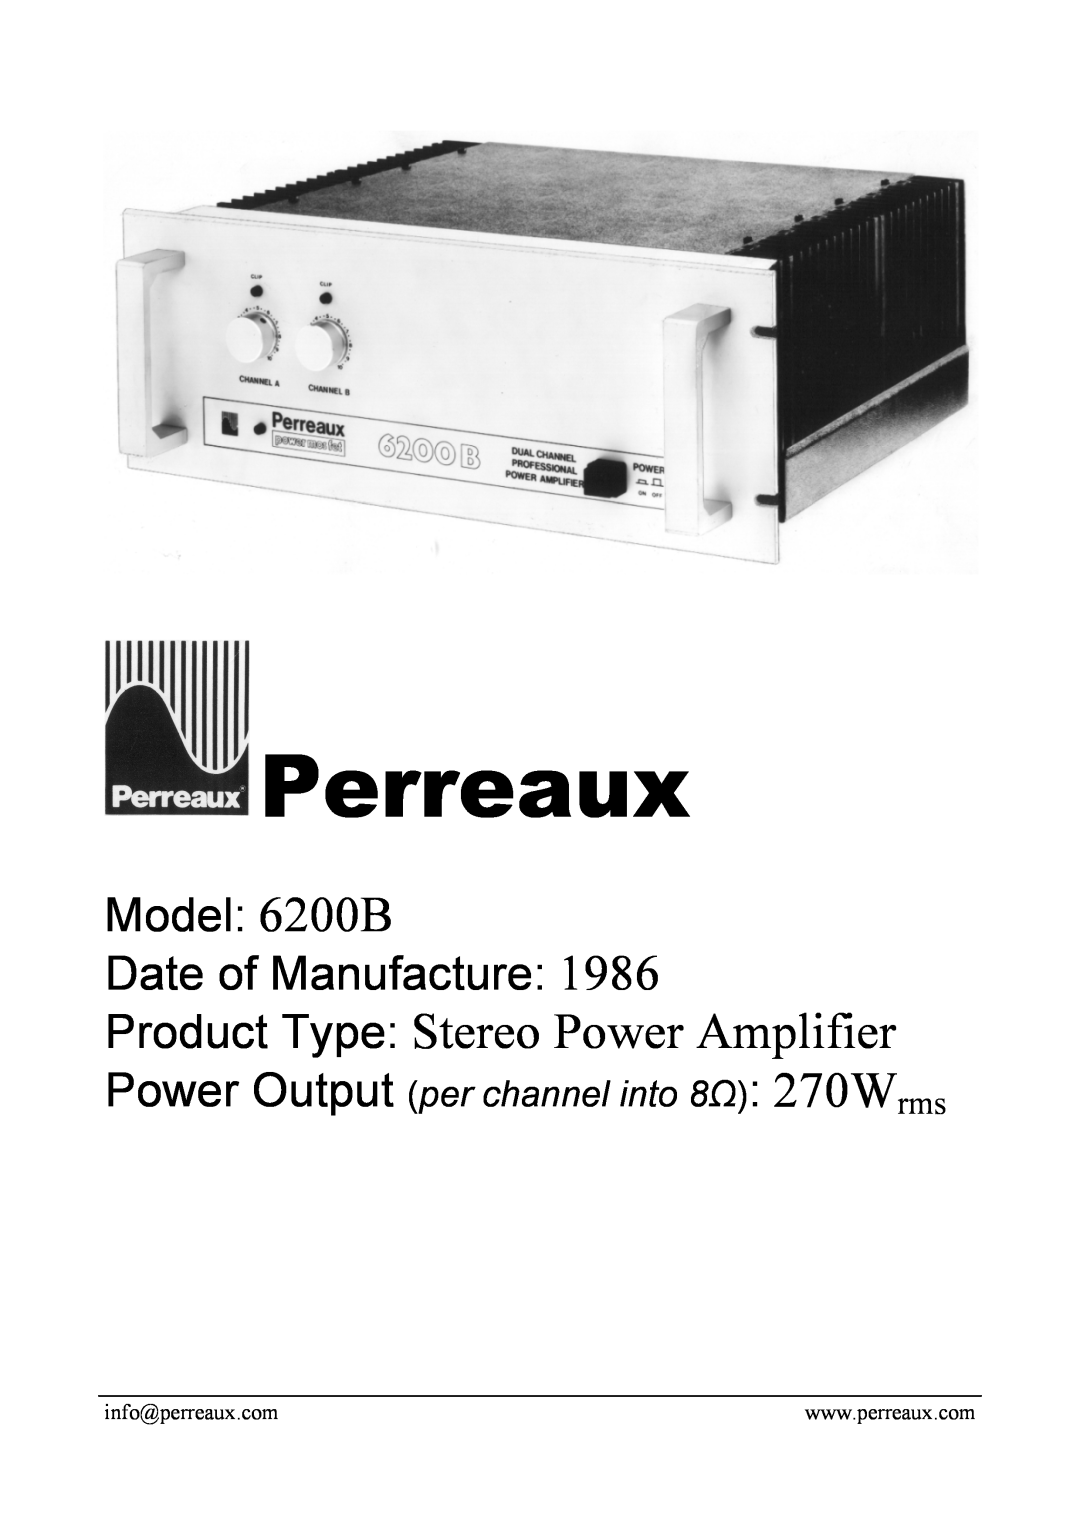 Perreaux manual Perreaux, Product Type Stereo Power Amplifier, Model 6200B Date of Manufacture 